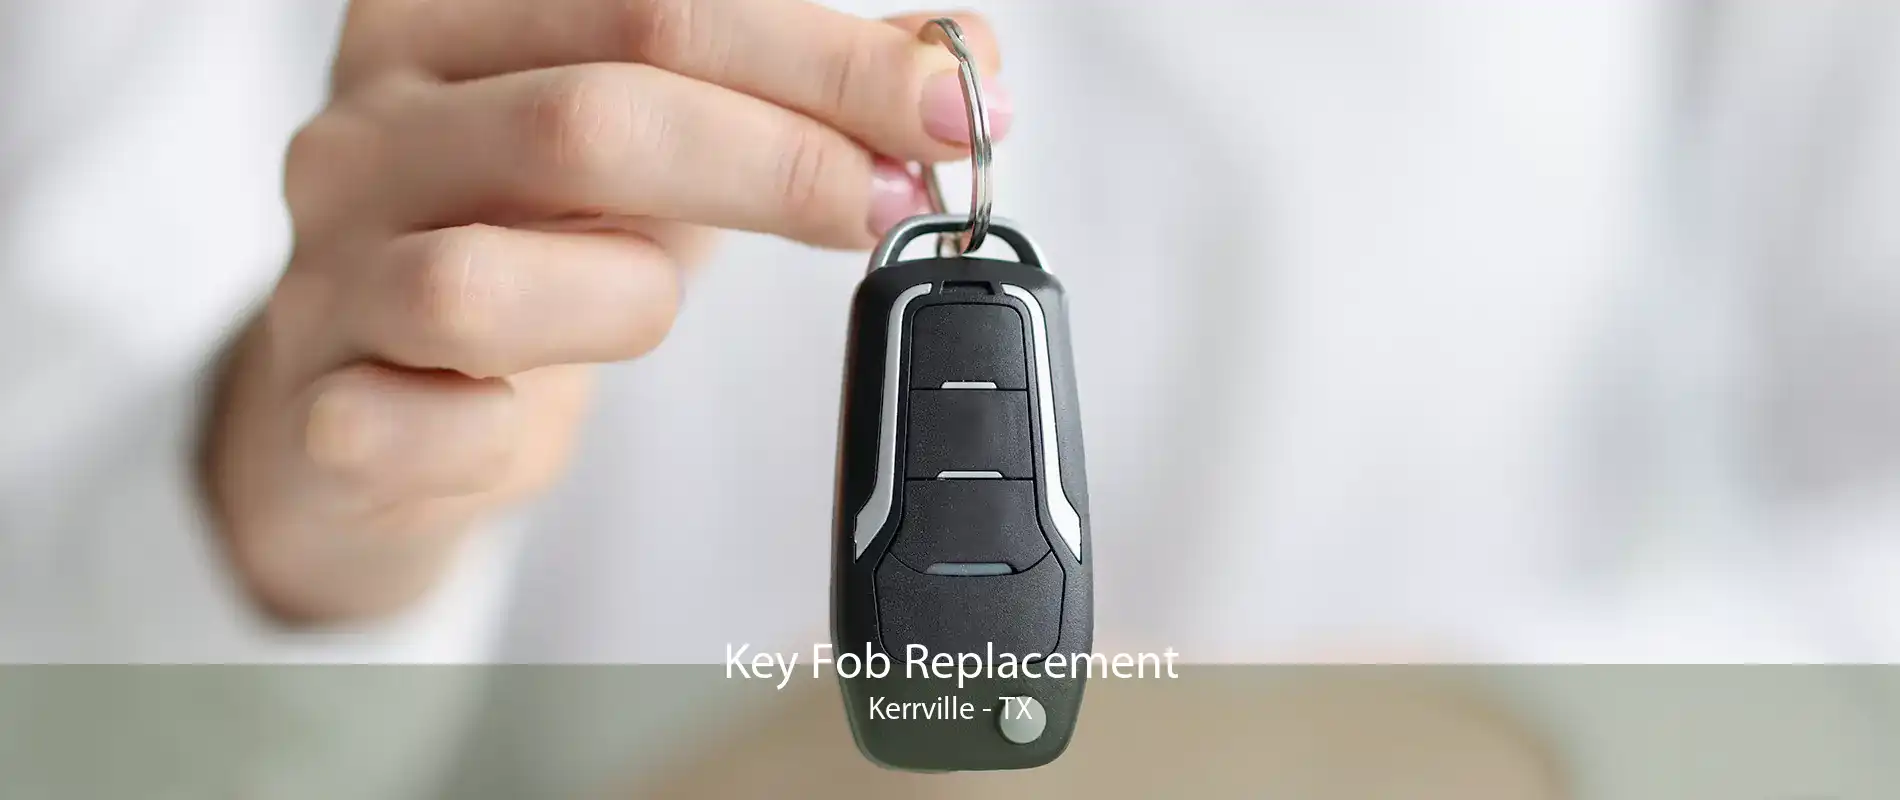 Key Fob Replacement Kerrville - TX